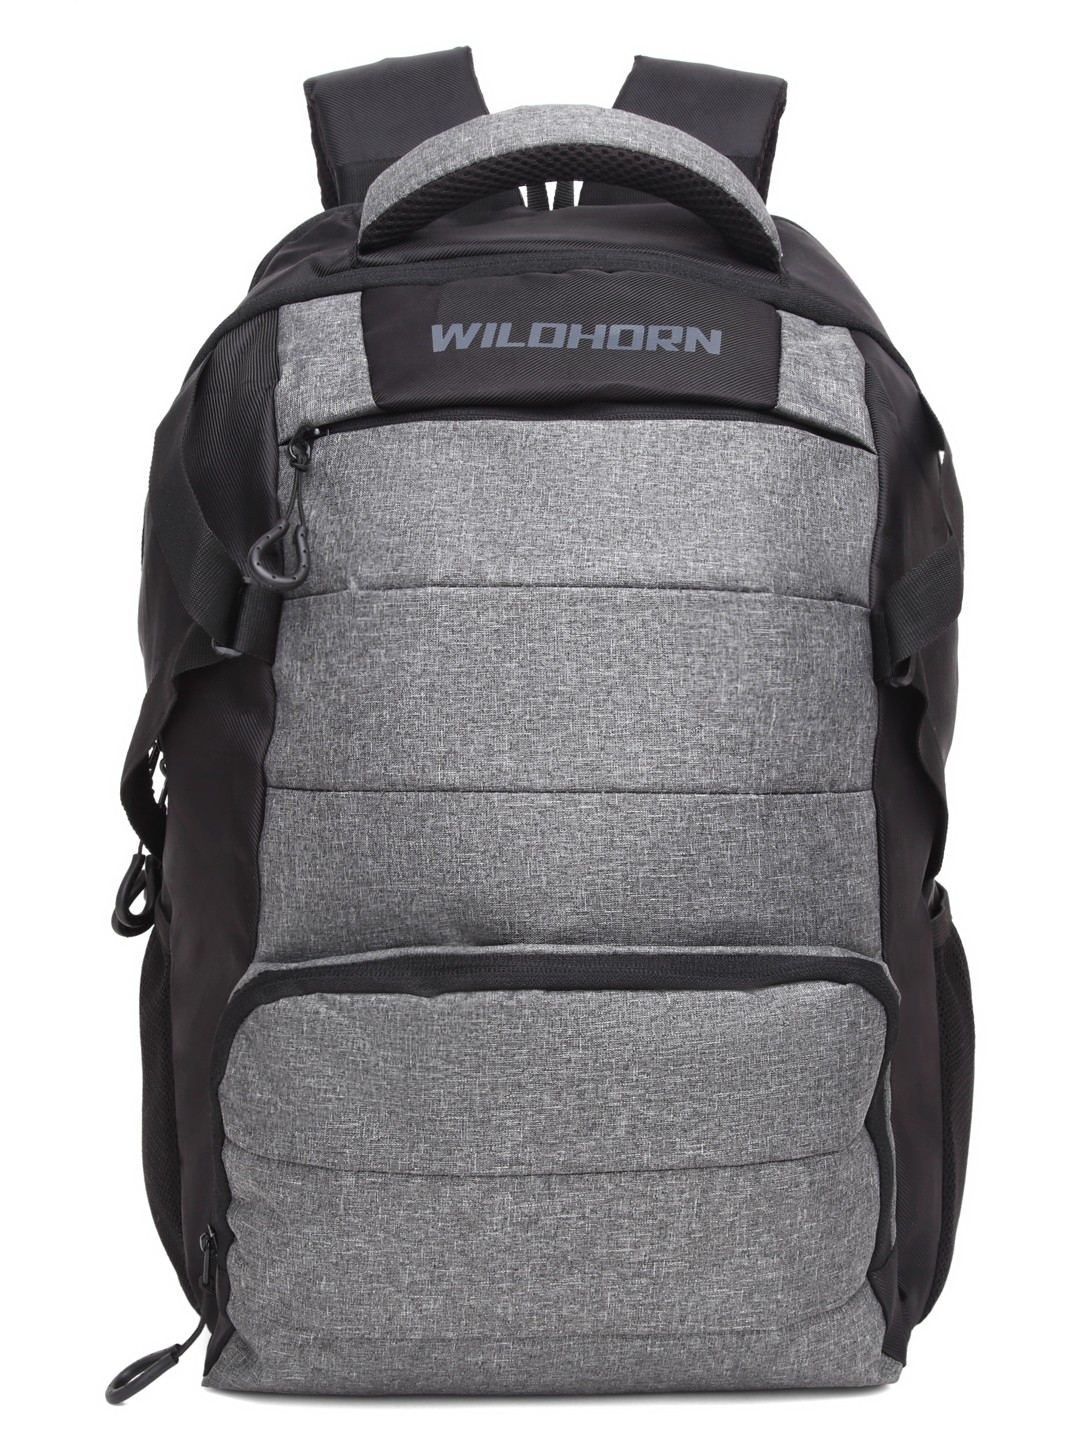 WildHorn | WILDHORN Laptop Backpack for Men & Women, Extra Large 30L Travel Backpack with Multi Zip Compartment, Business College Bookbag Fit 17 Inch Laptop 0